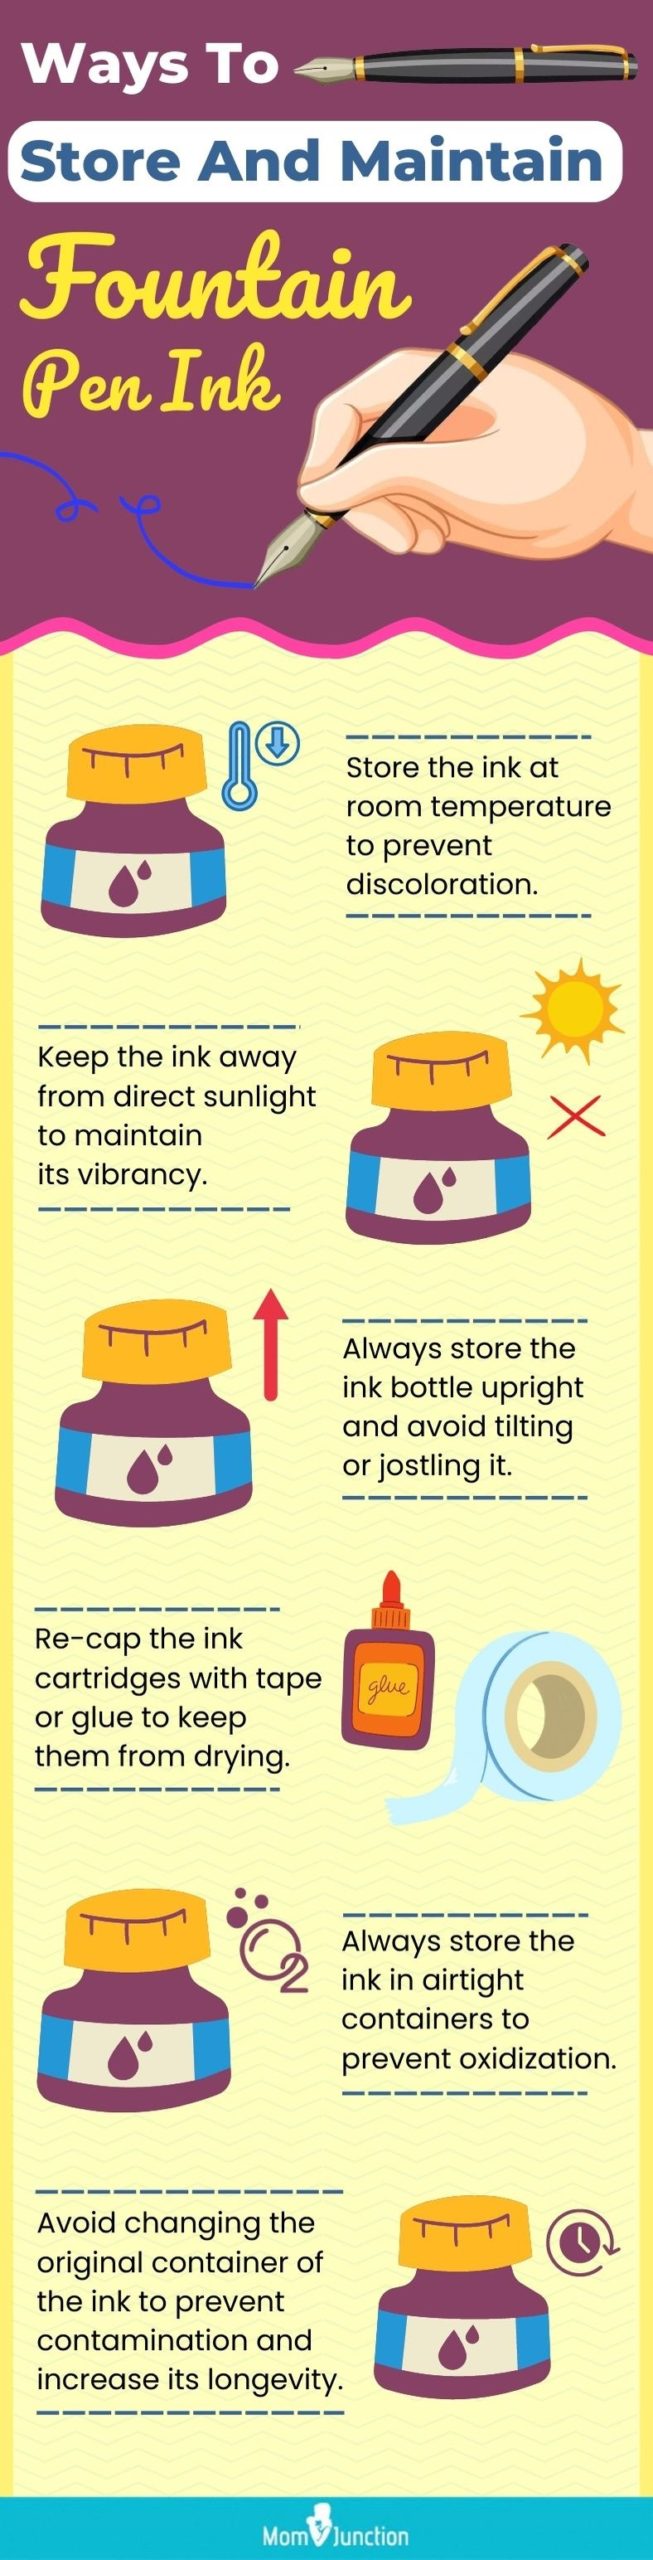 Ways To Store And Maintain Fountain Pen Ink (infographic)